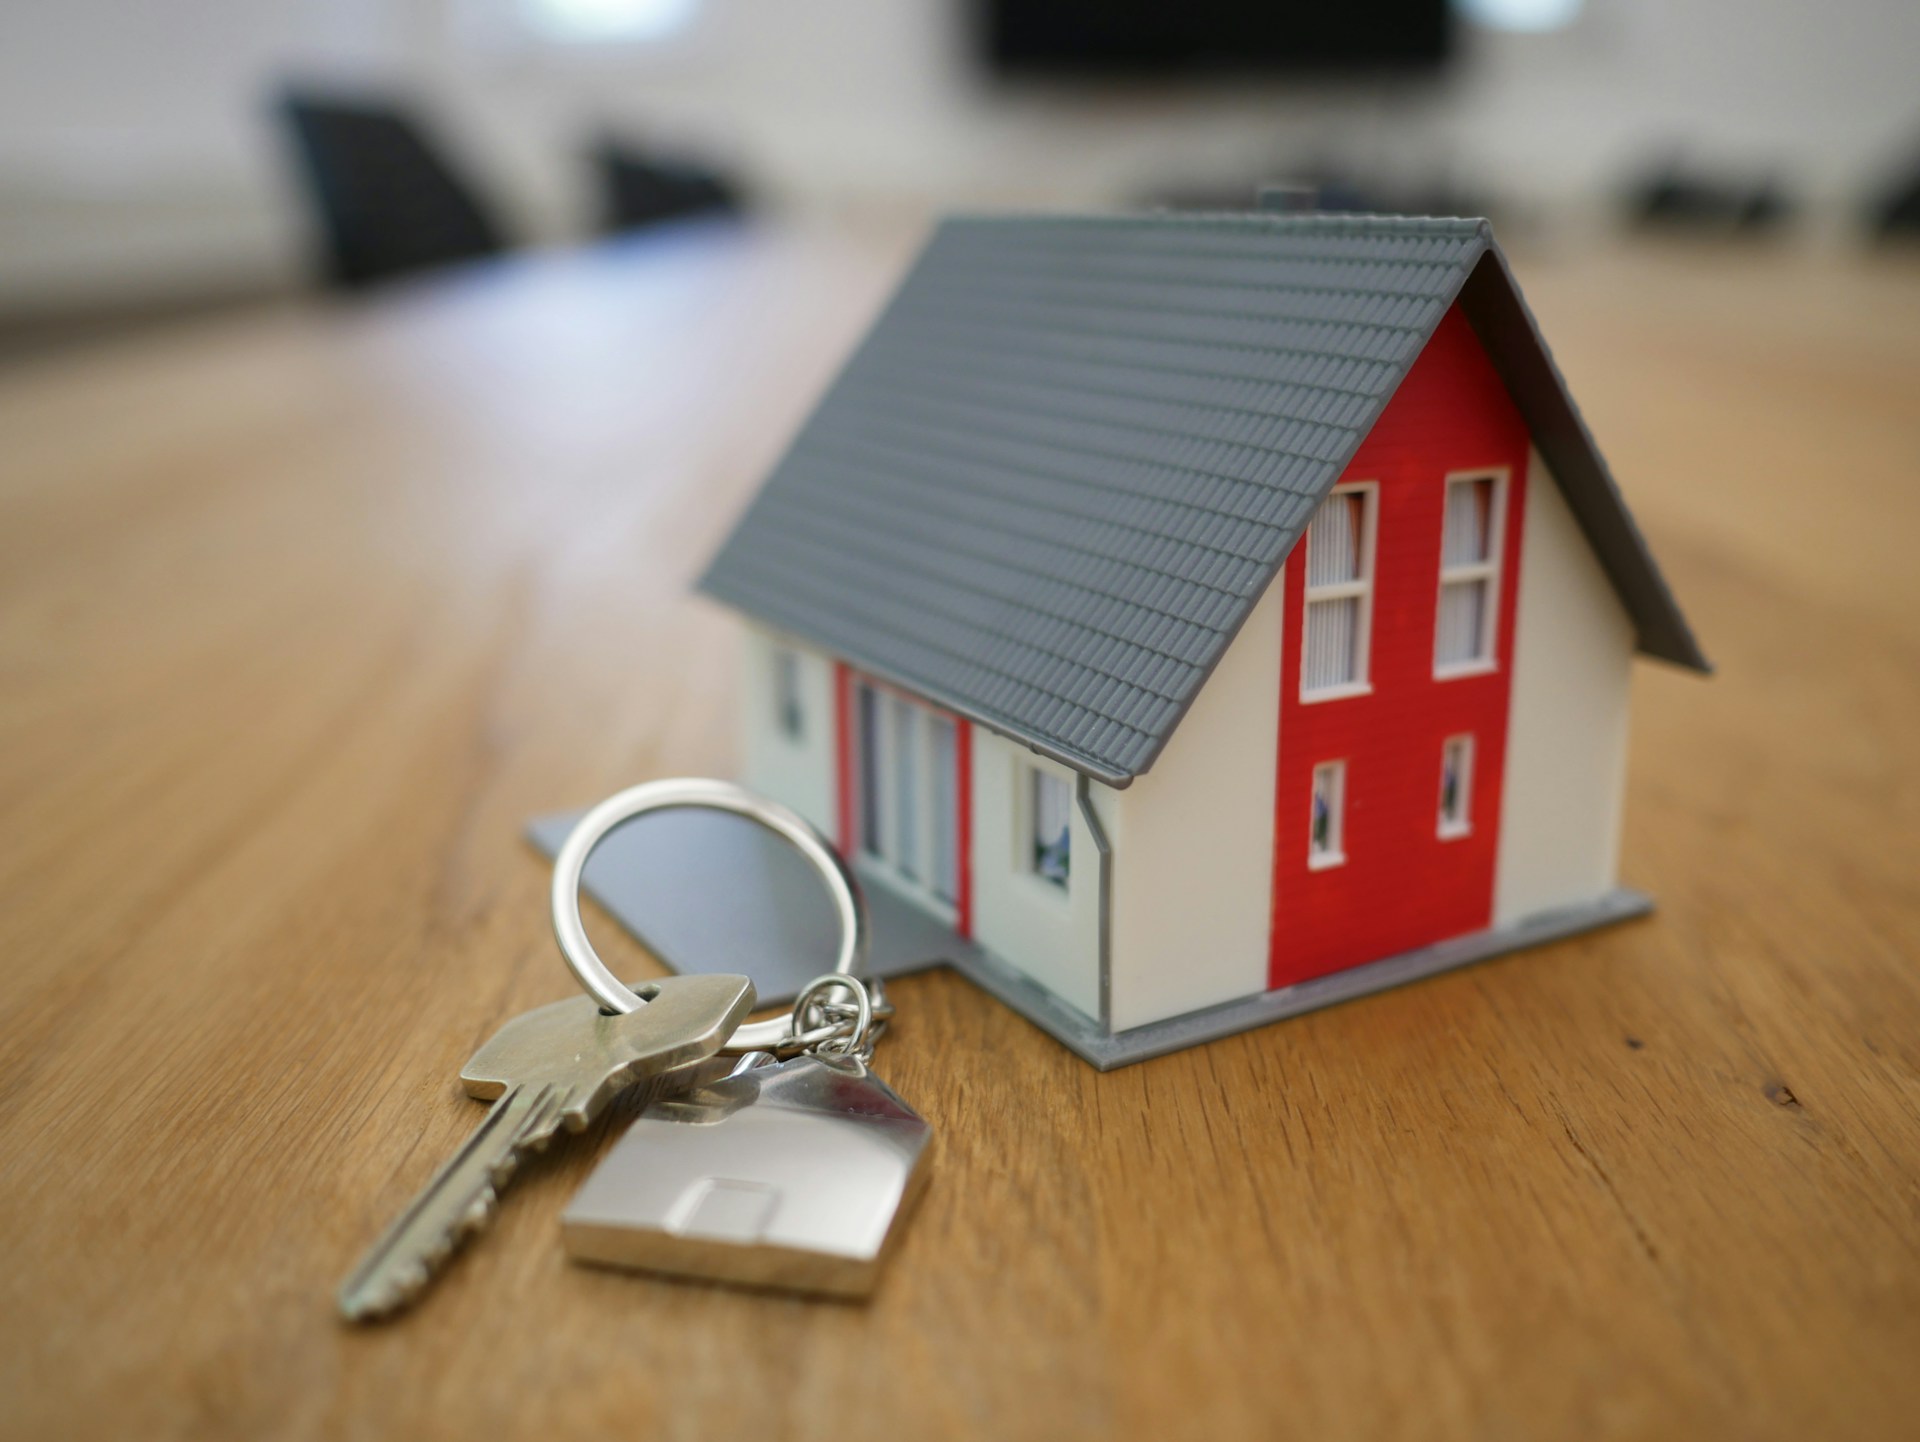 A miniature home and a home key on a wooden table